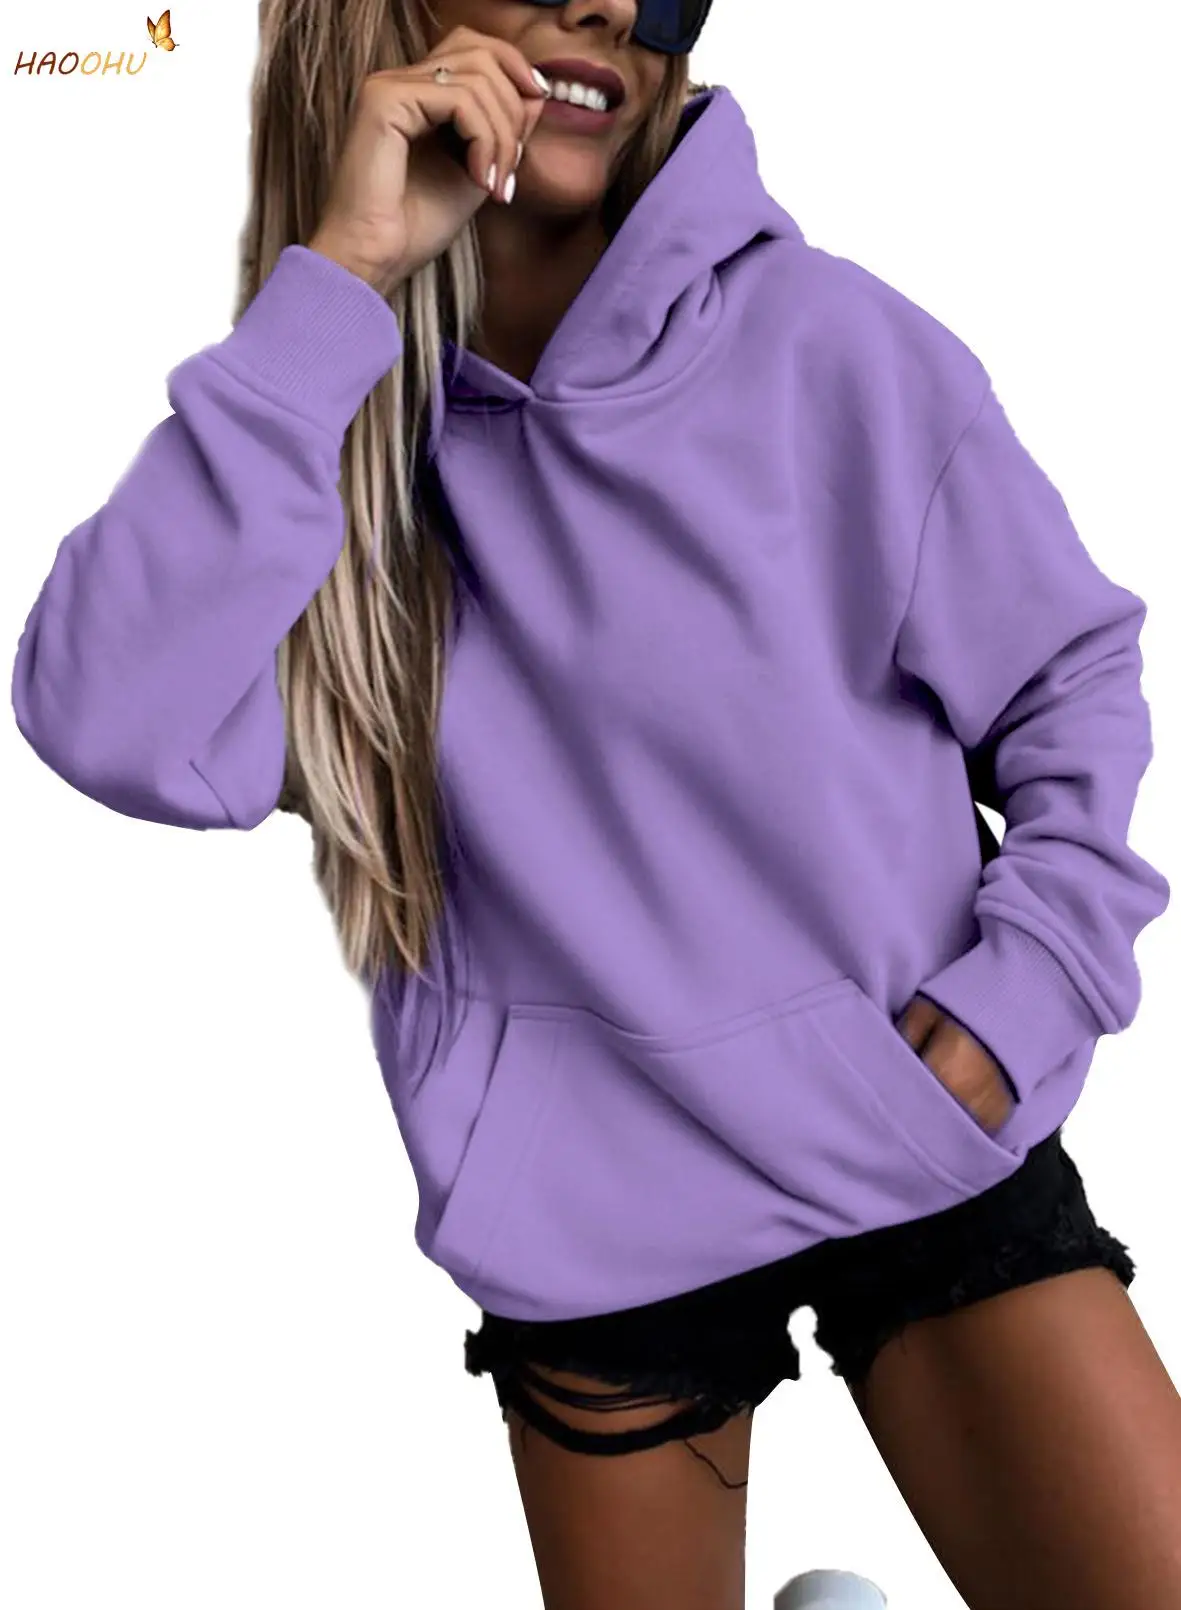 

HAOOHU Hooded Hoodie Urban Casual Commute Women 2021 New Autumn Winter Solid Color Hoodie Pocket Thread Cuff Hem Women Clothes